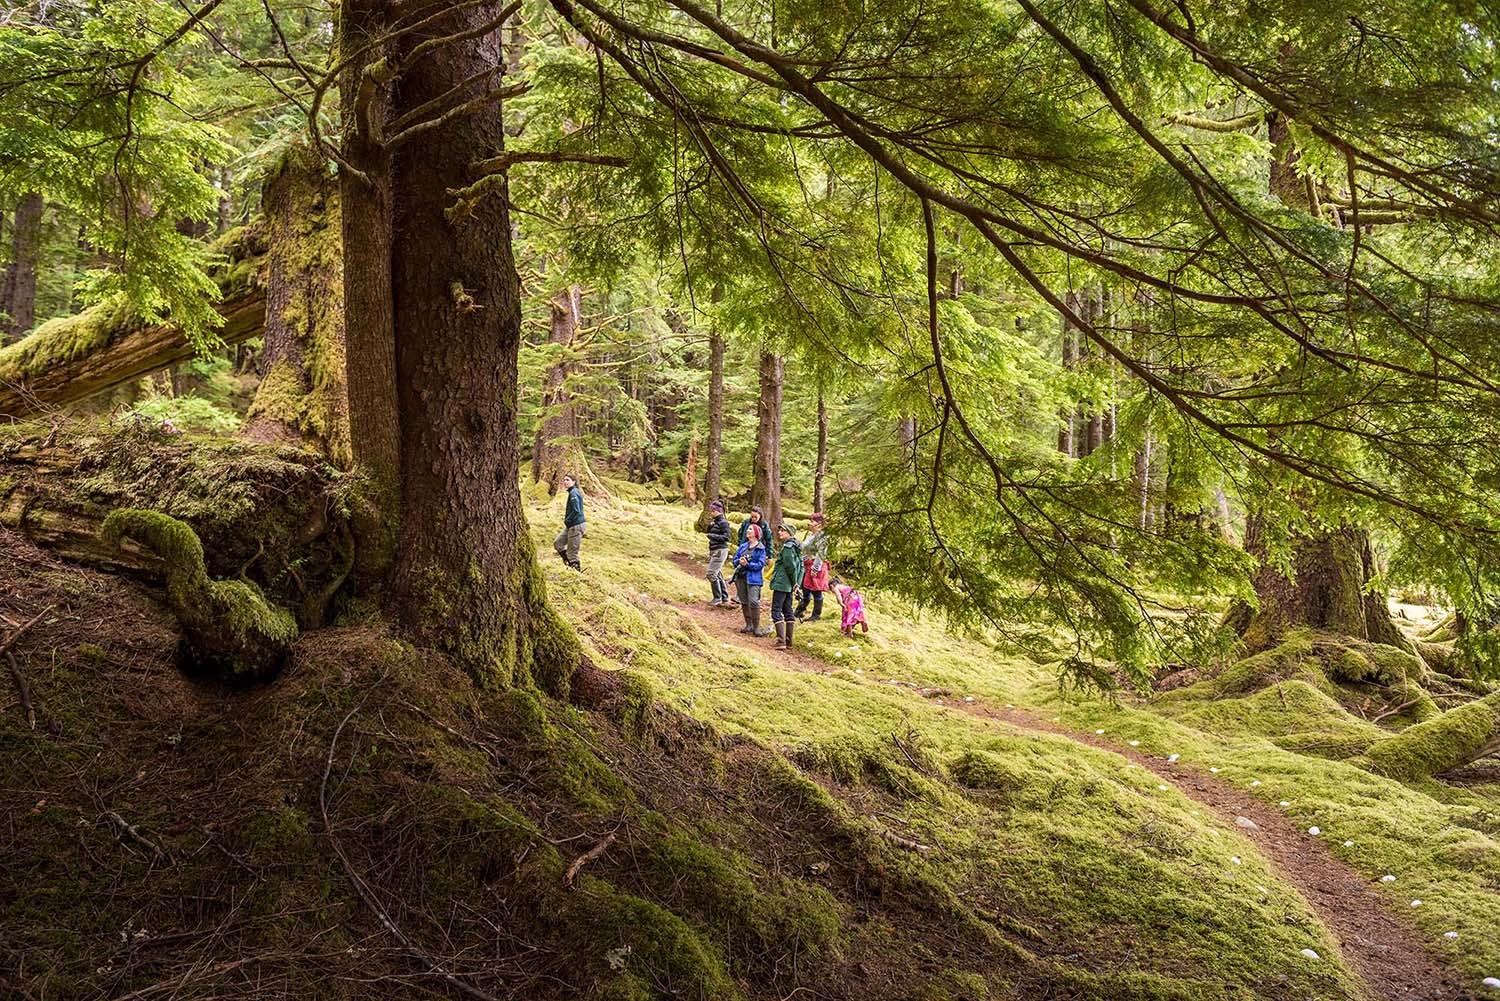 A group of people standing on a trail in a lush forest